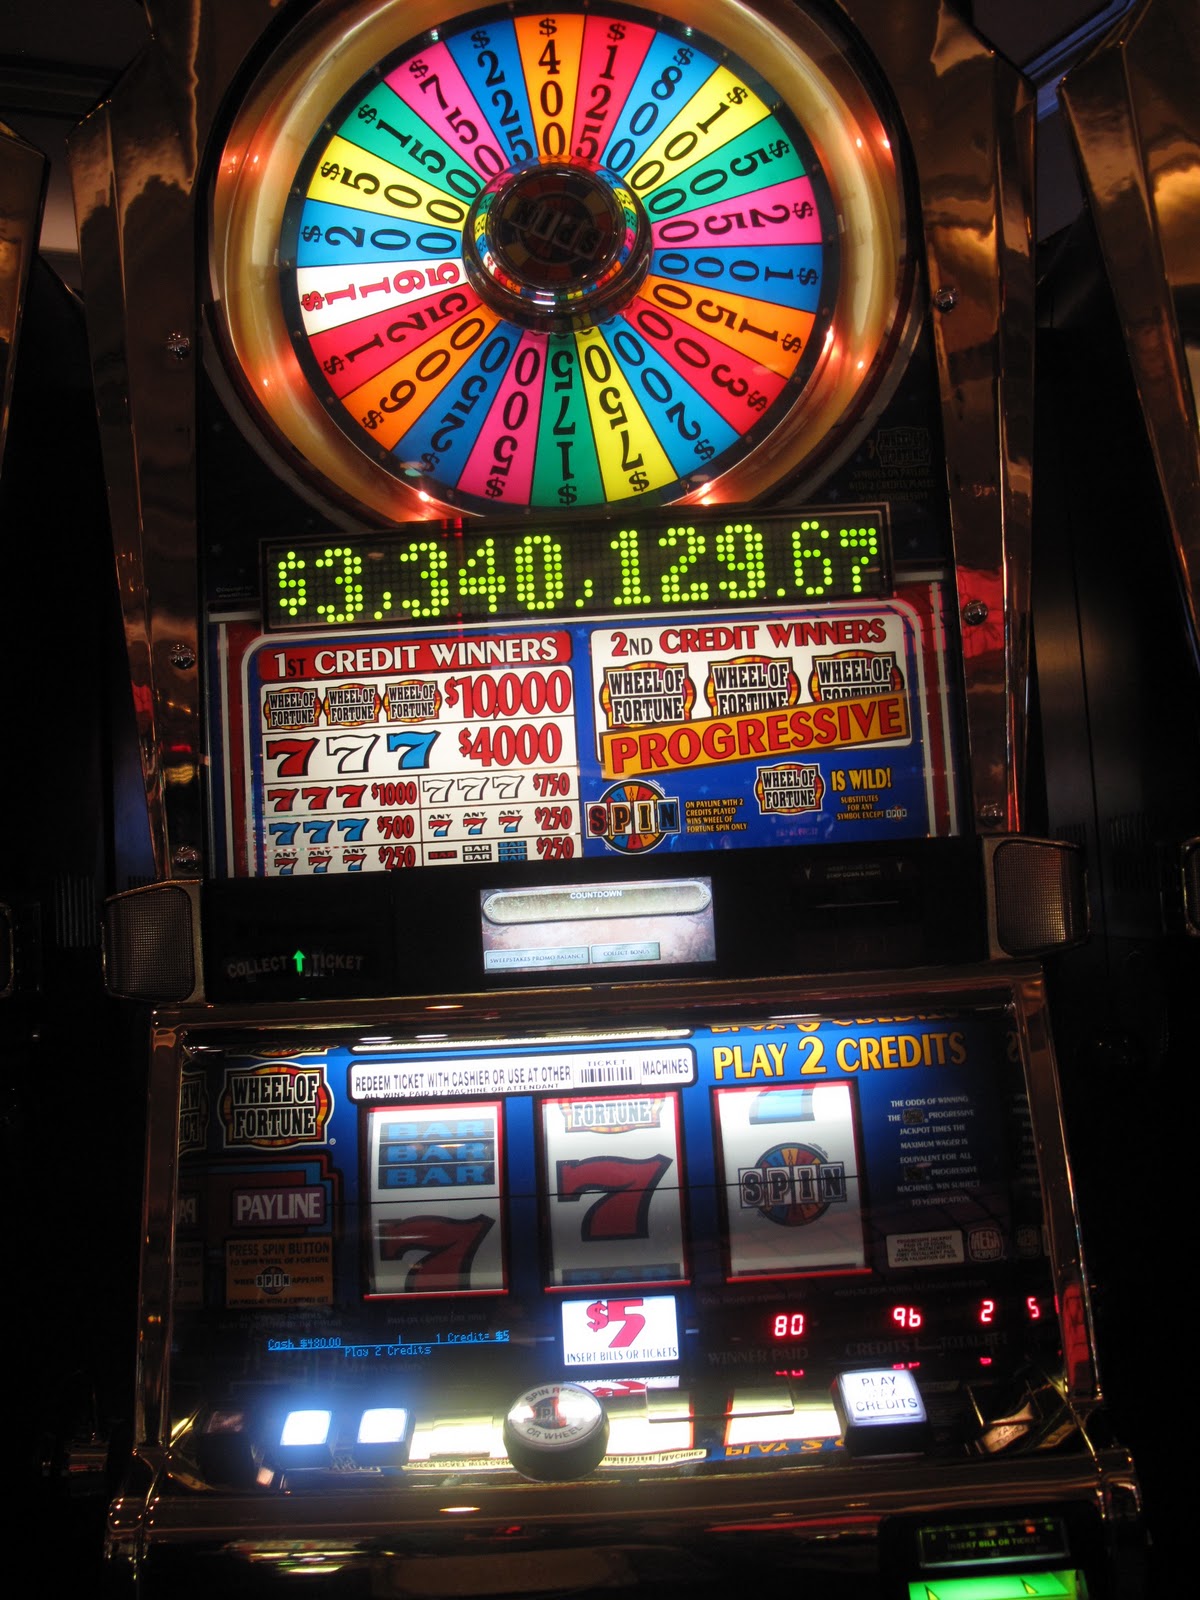 Highest payout slot machine in laughlin casinos